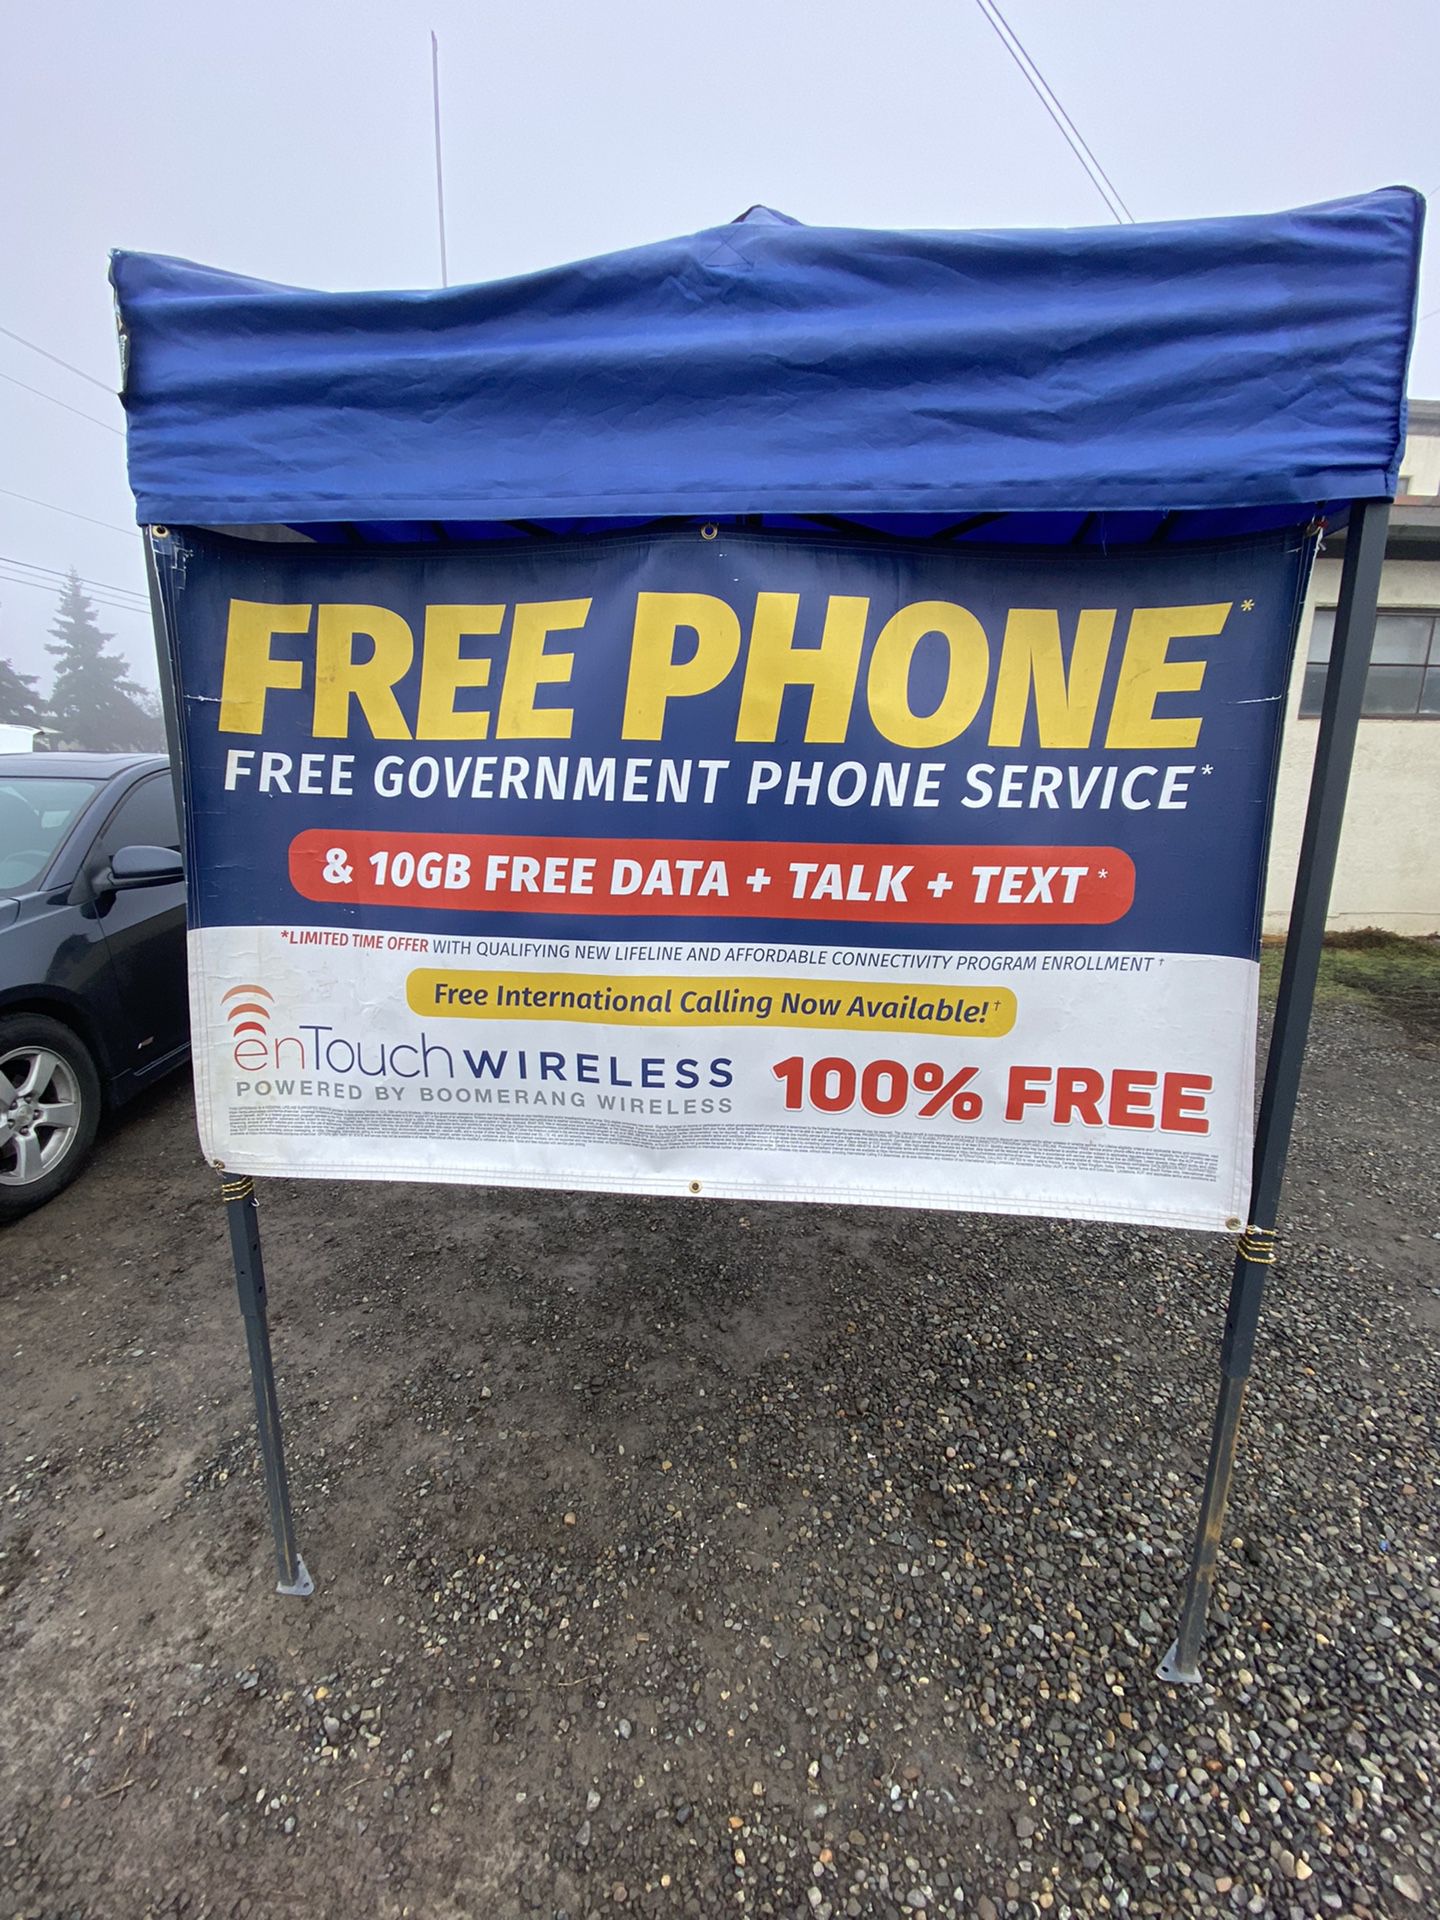 Free Government Phones (Also Offer Discounted Tablets)